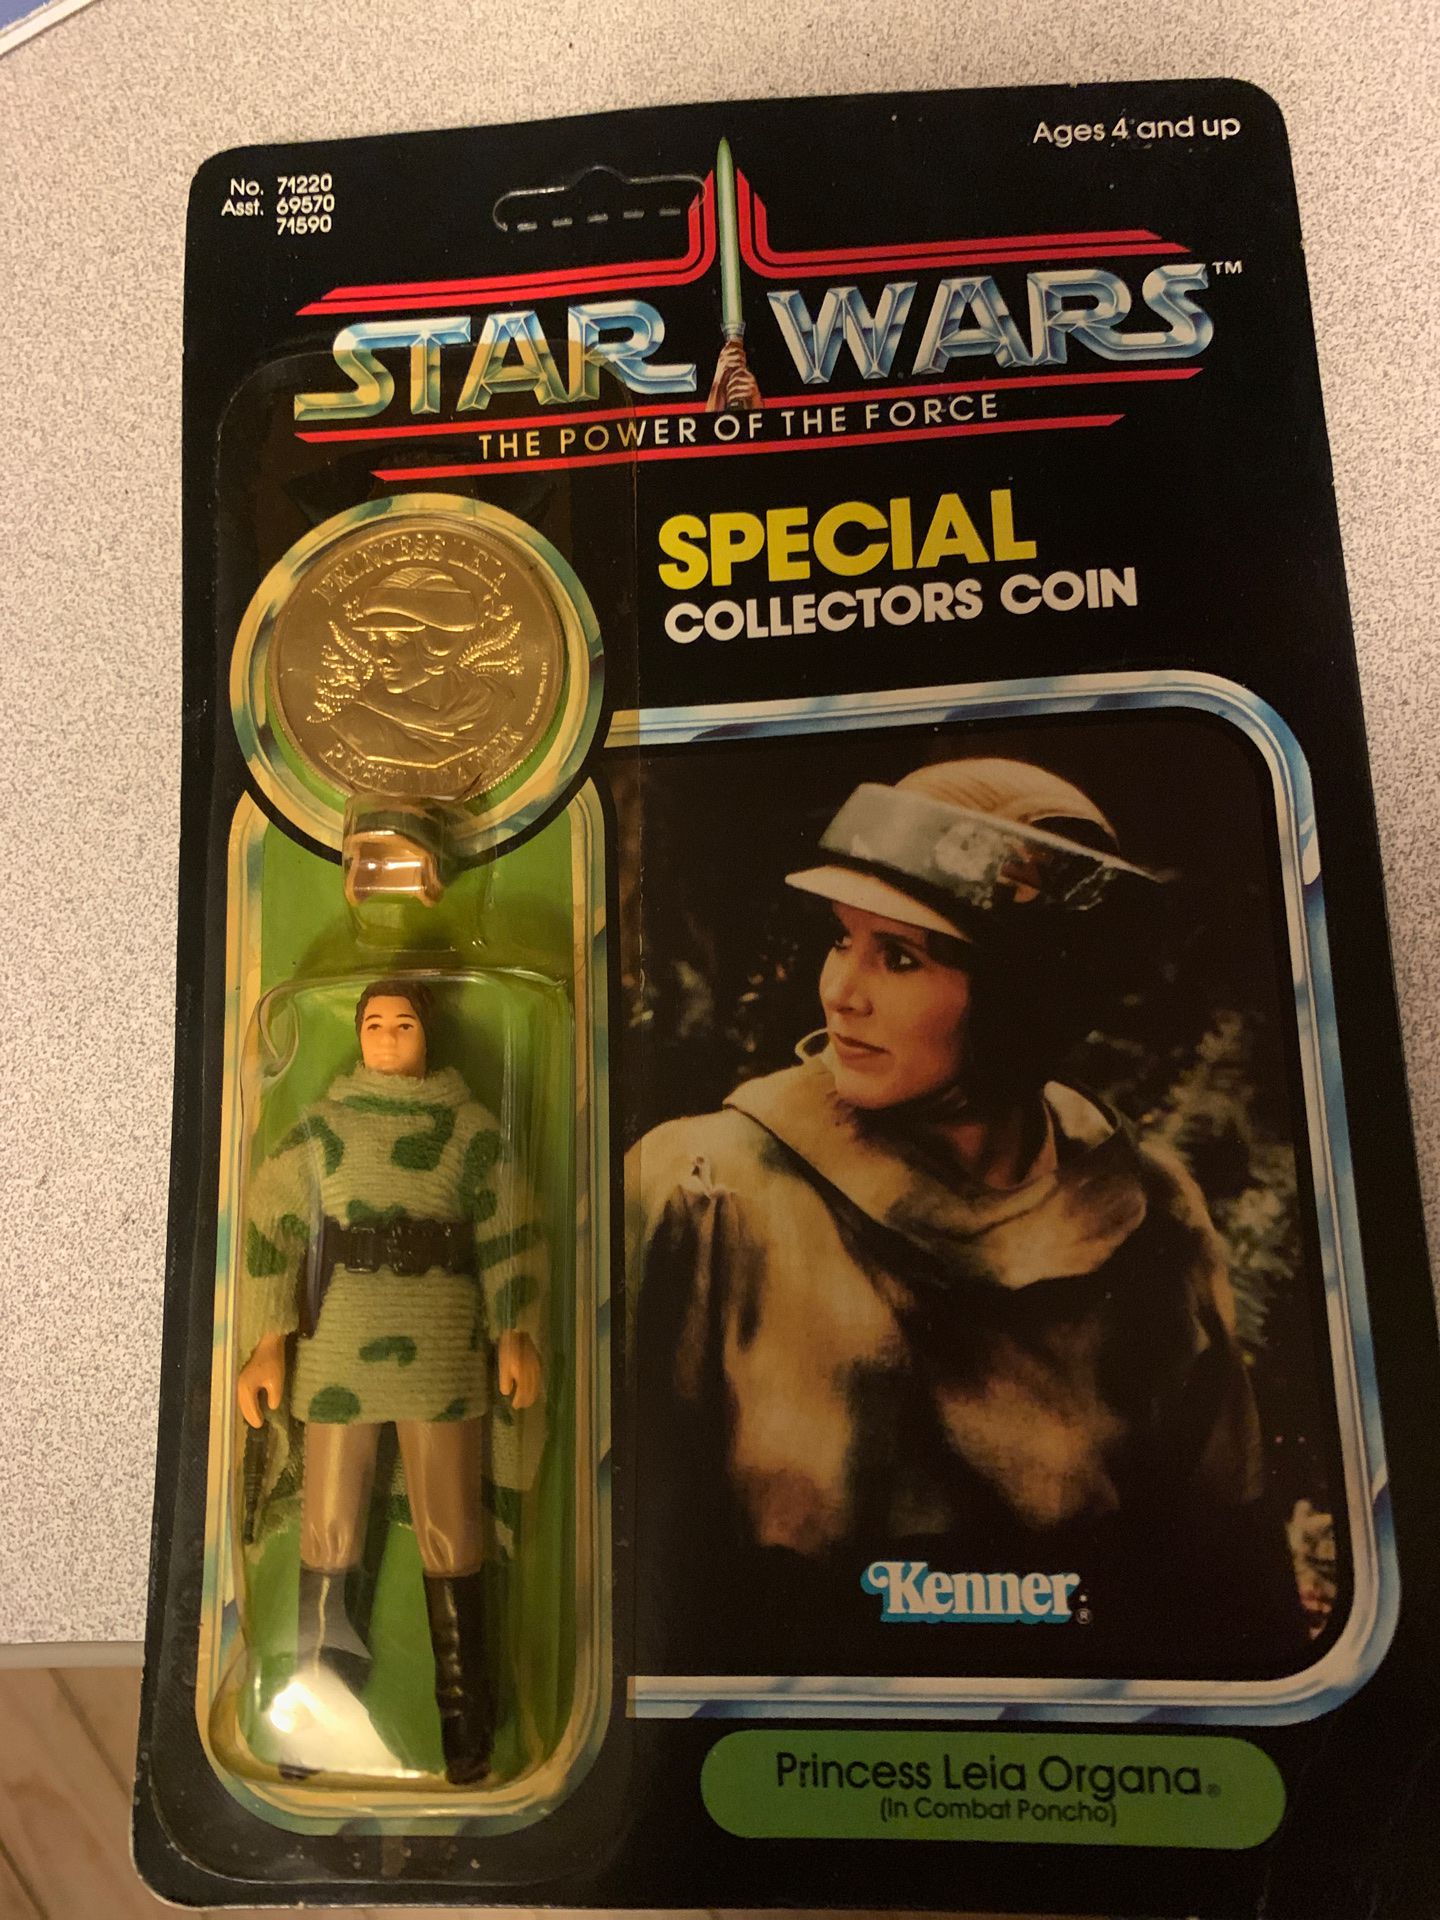 Vintage Star Wars Kenner Princess Leia with Collectors Coin!